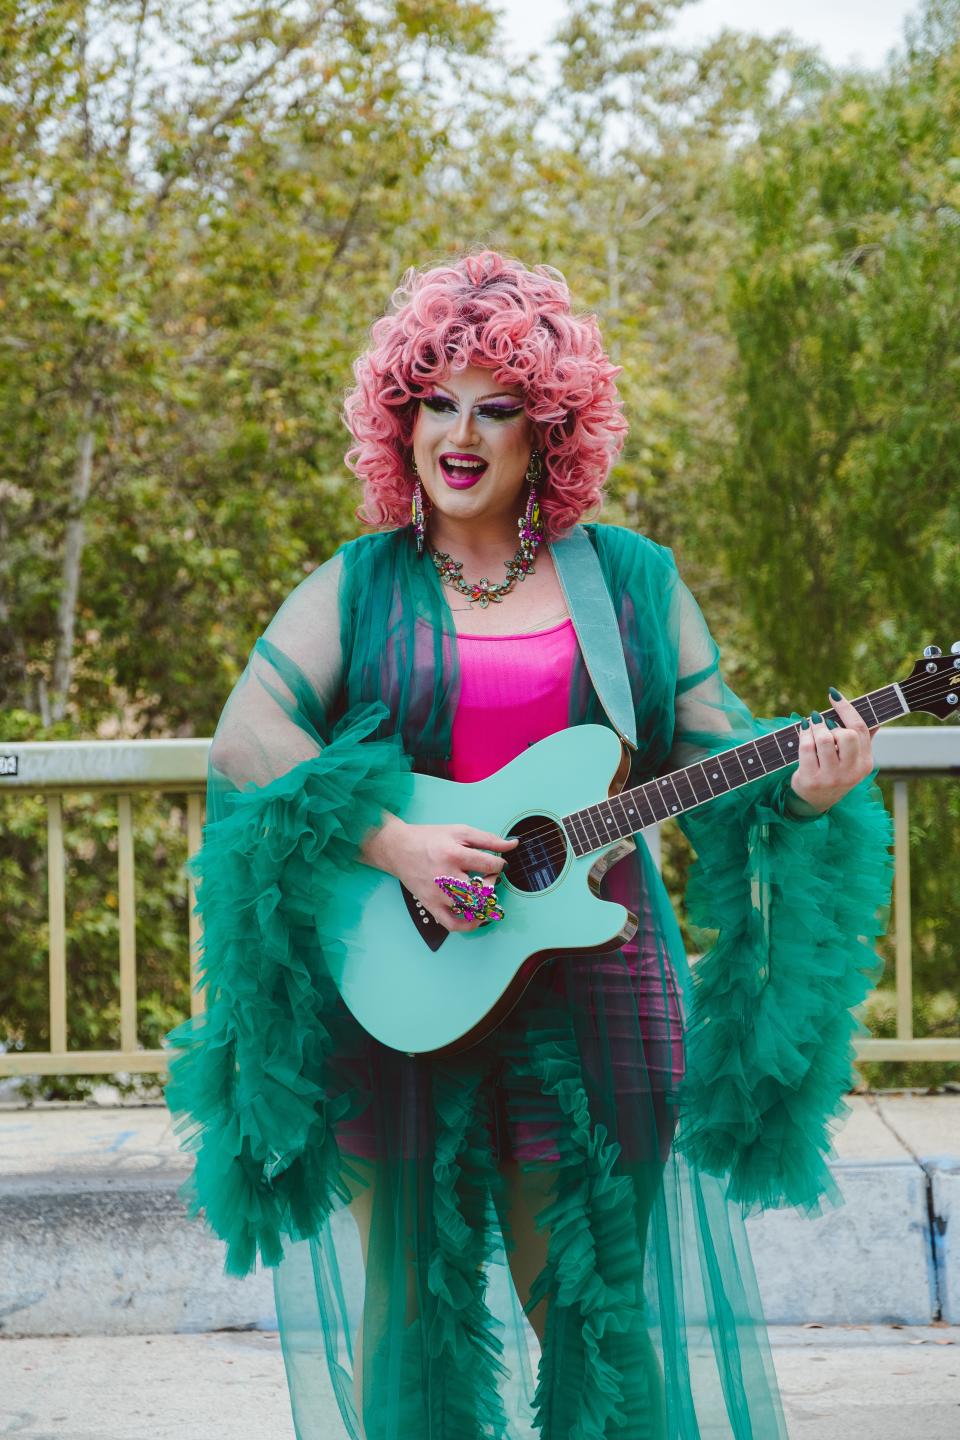 Flamy Grant, a singing-songwriting drag queen whose 2022 album, "Bible Belt Baby" is the first contemporary Christian album by a drag performer.